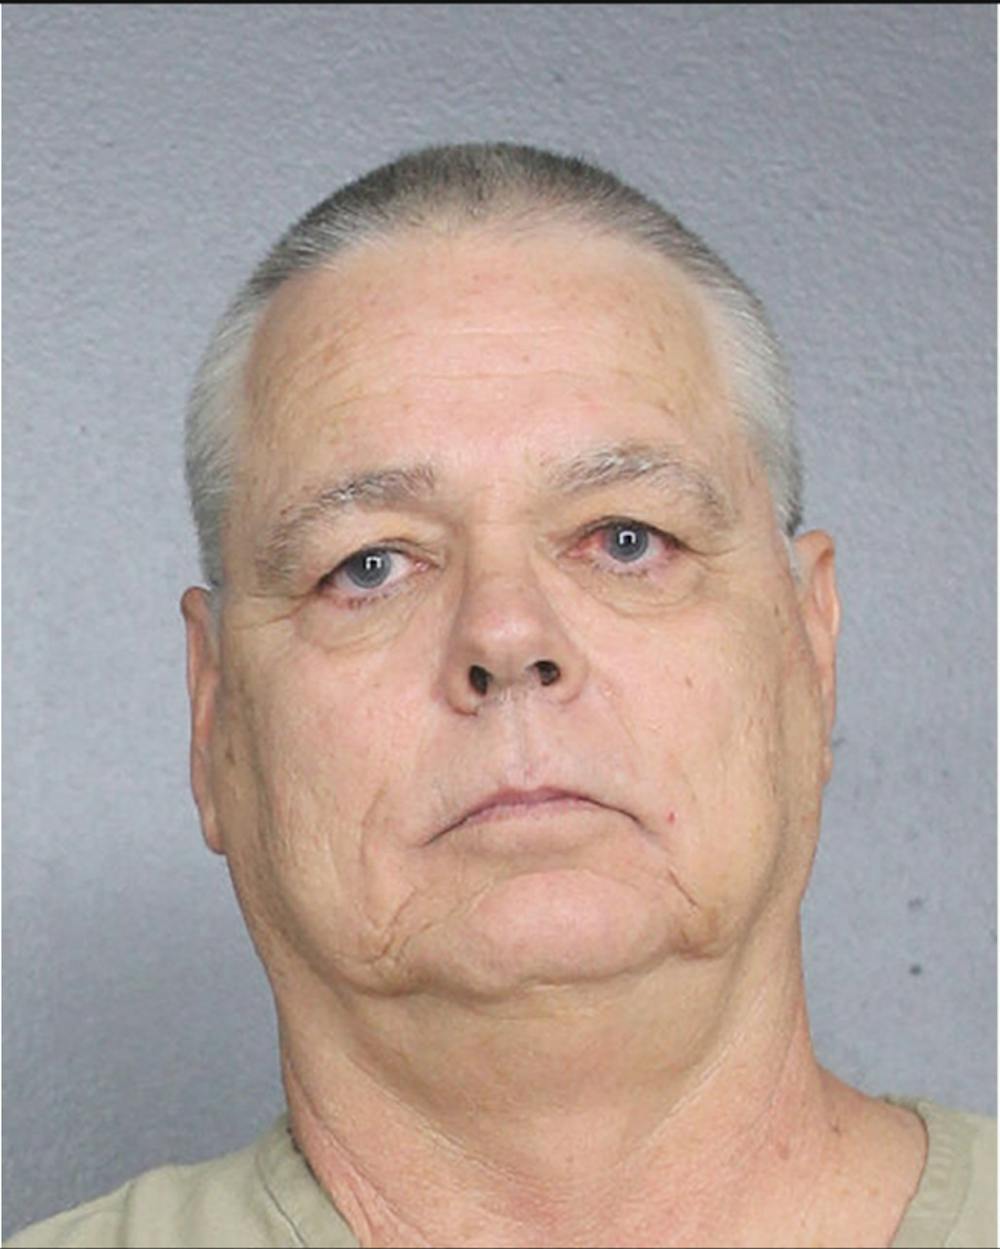 <p><span>This undated photo provided by the Broward County, Fla., Sheriff's Office shows Scot Peterson, a former Florida deputy who stood outside instead of confronting the gunman during last year's Parkland school massacre was arrested Tuesday, June 4, 2019, on 11 criminal charges related to his inaction.</span></p>